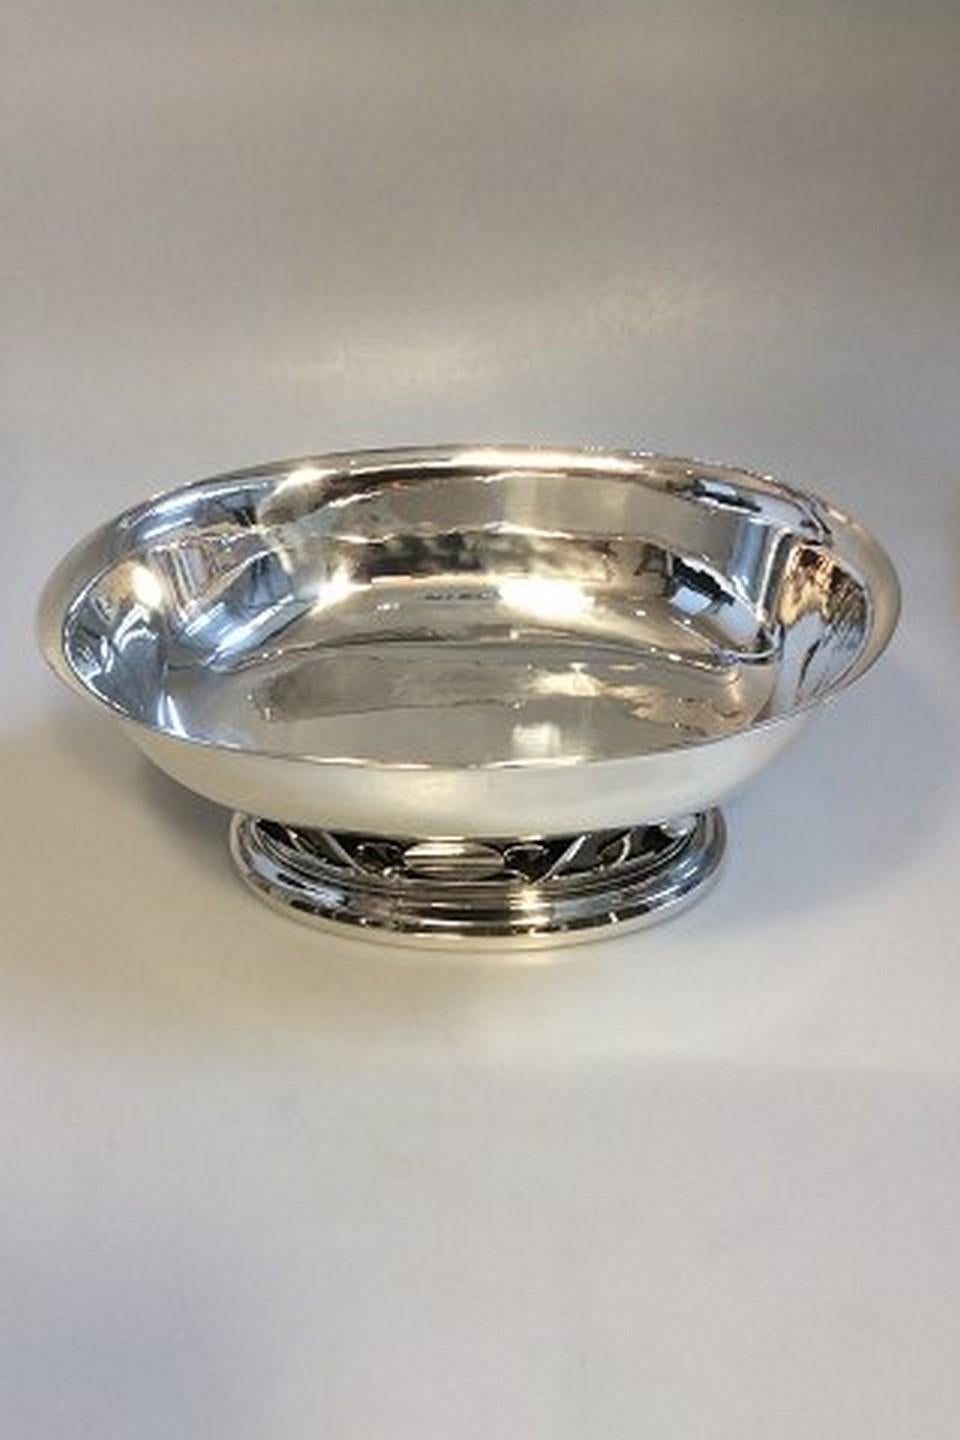 Large Georg Jensen sterling silver oval bowl unique

From 1945-1951.

Measures: 30cm x 21.7cm x 12.5cm (11.81